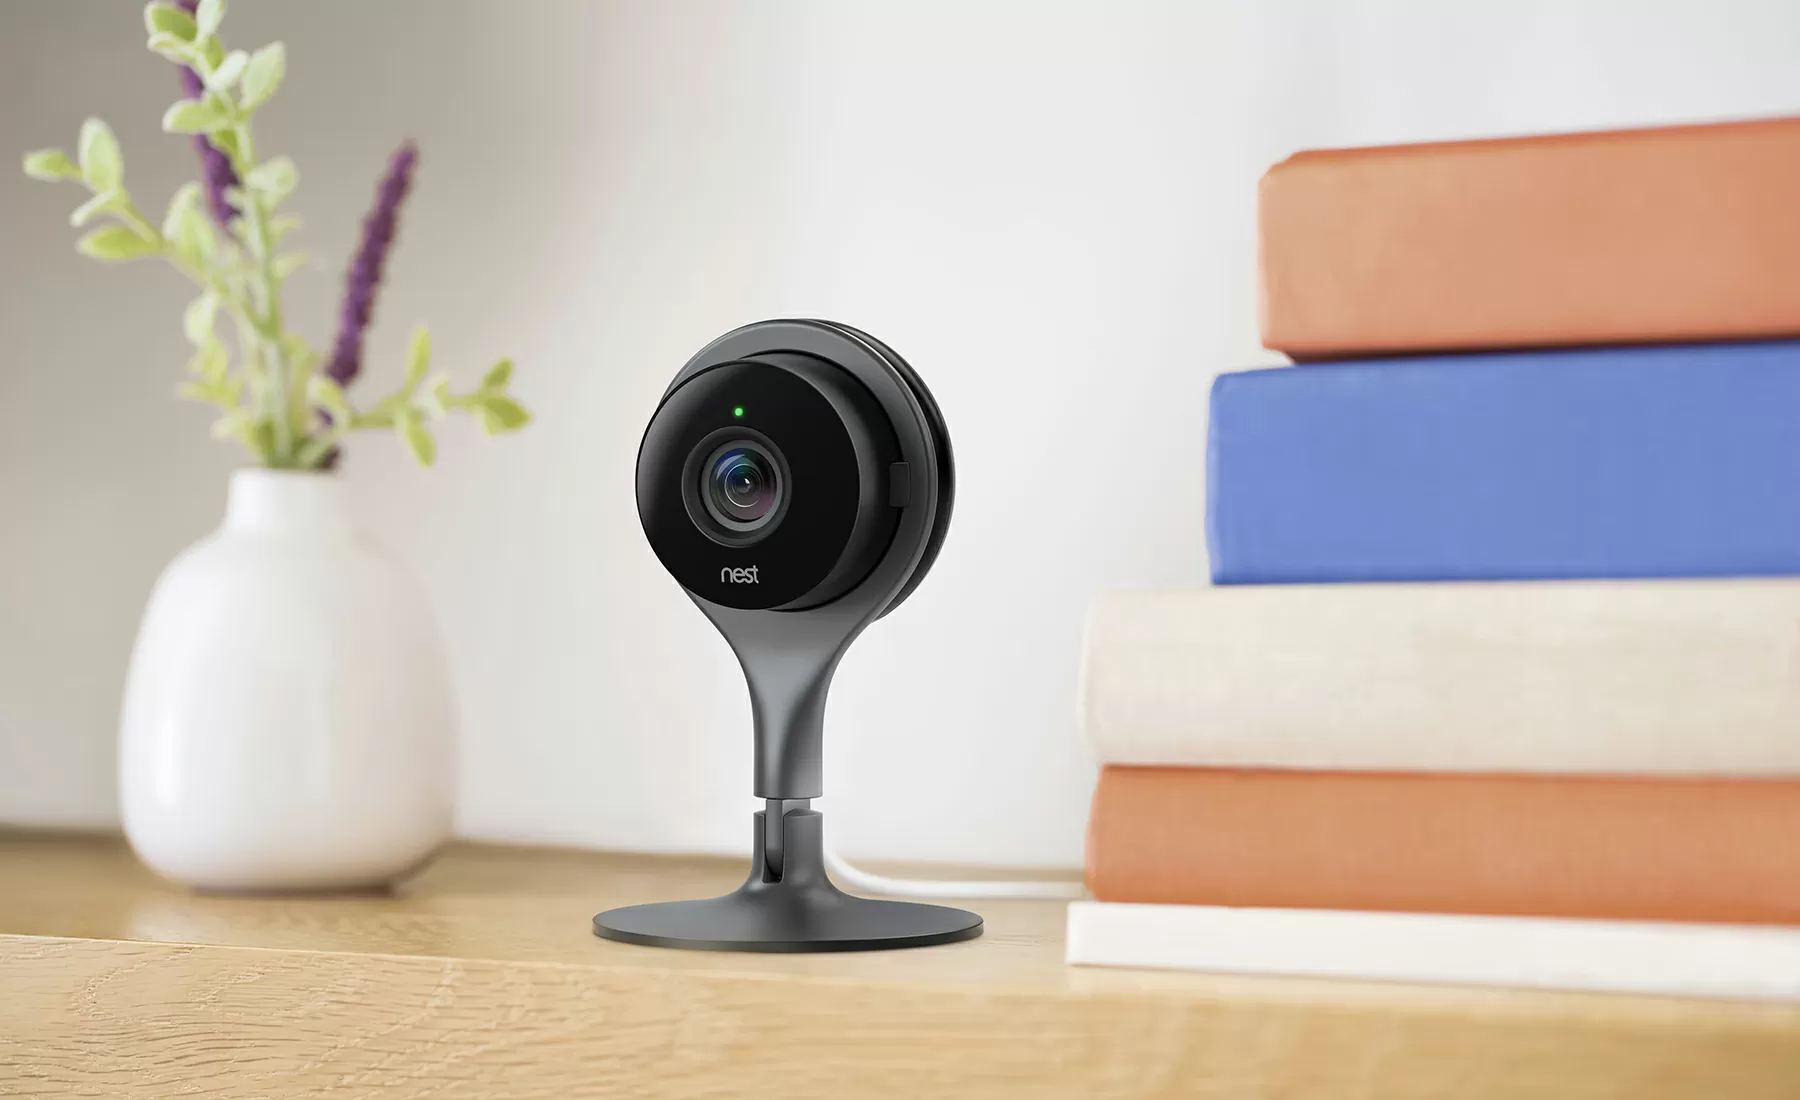 Nest is reportedly prepping a 4K resolution indoor security camera